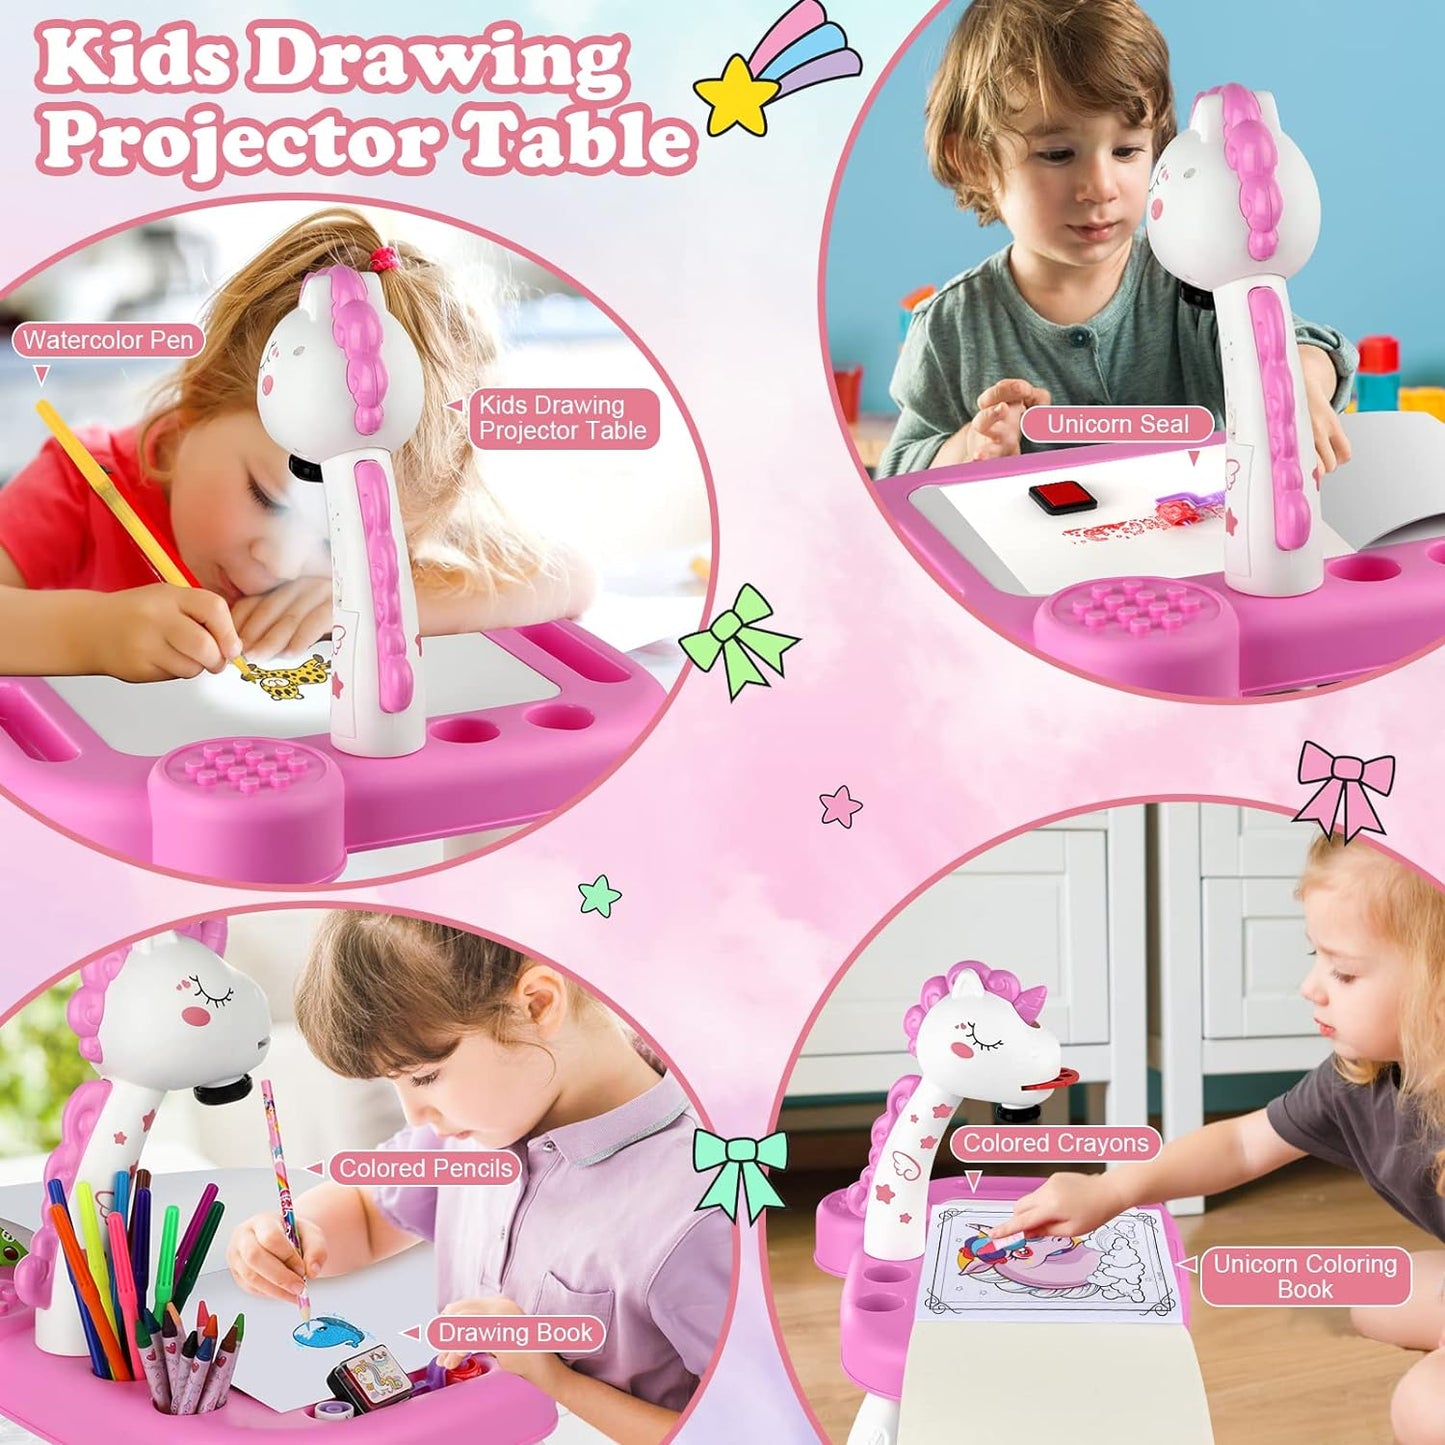 Children's Drawing Projector